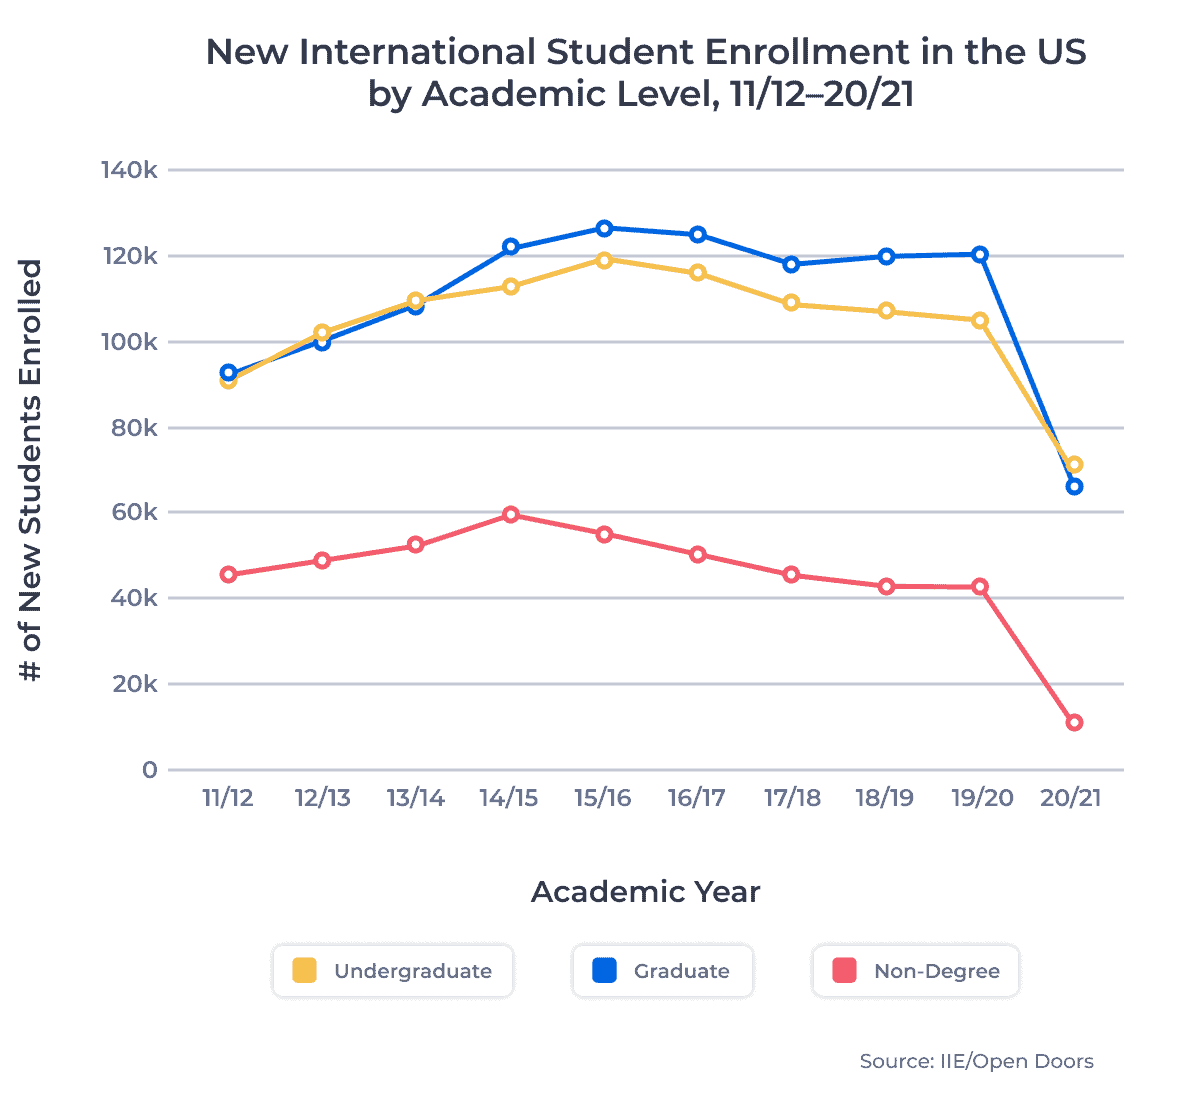 Line chart showing new international student enrollment in the US by academic level from the 2011/12 to the 2020/21 academic year. Examined in detail below.